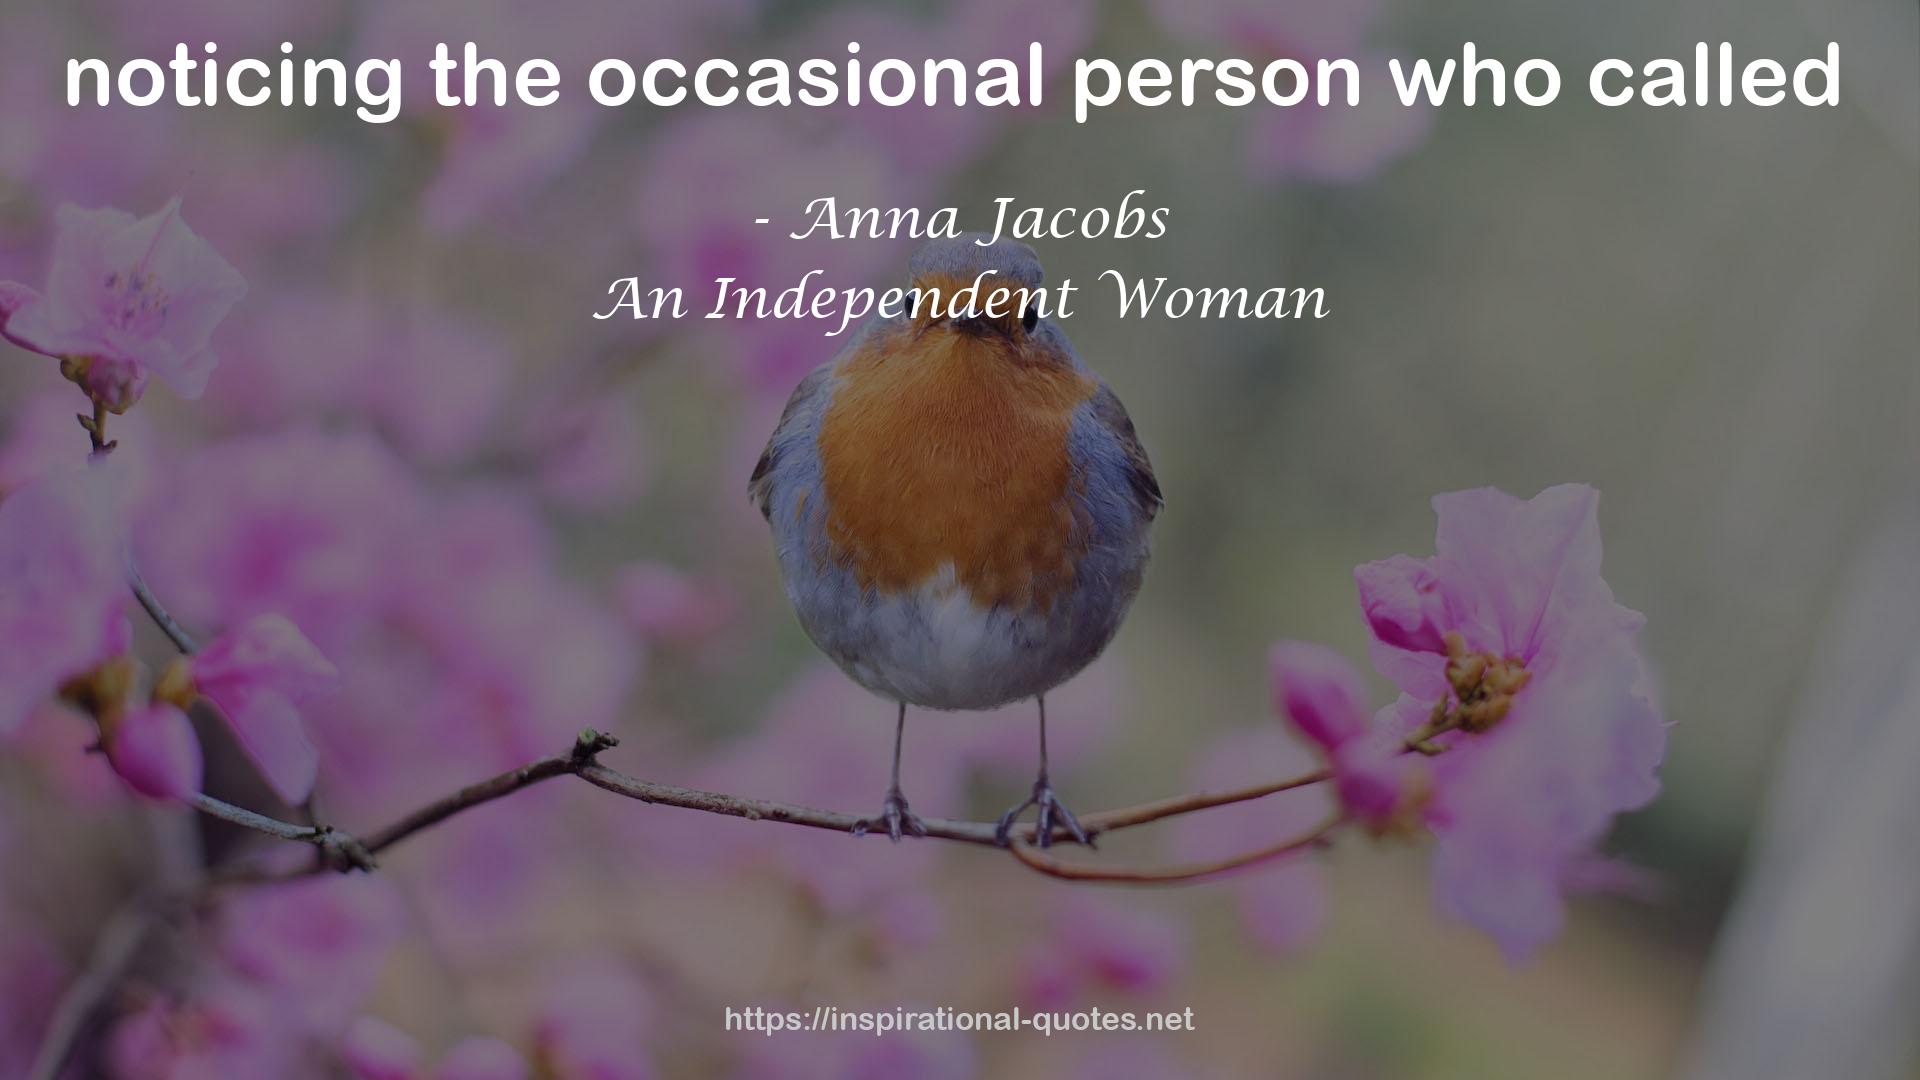 An Independent Woman QUOTES